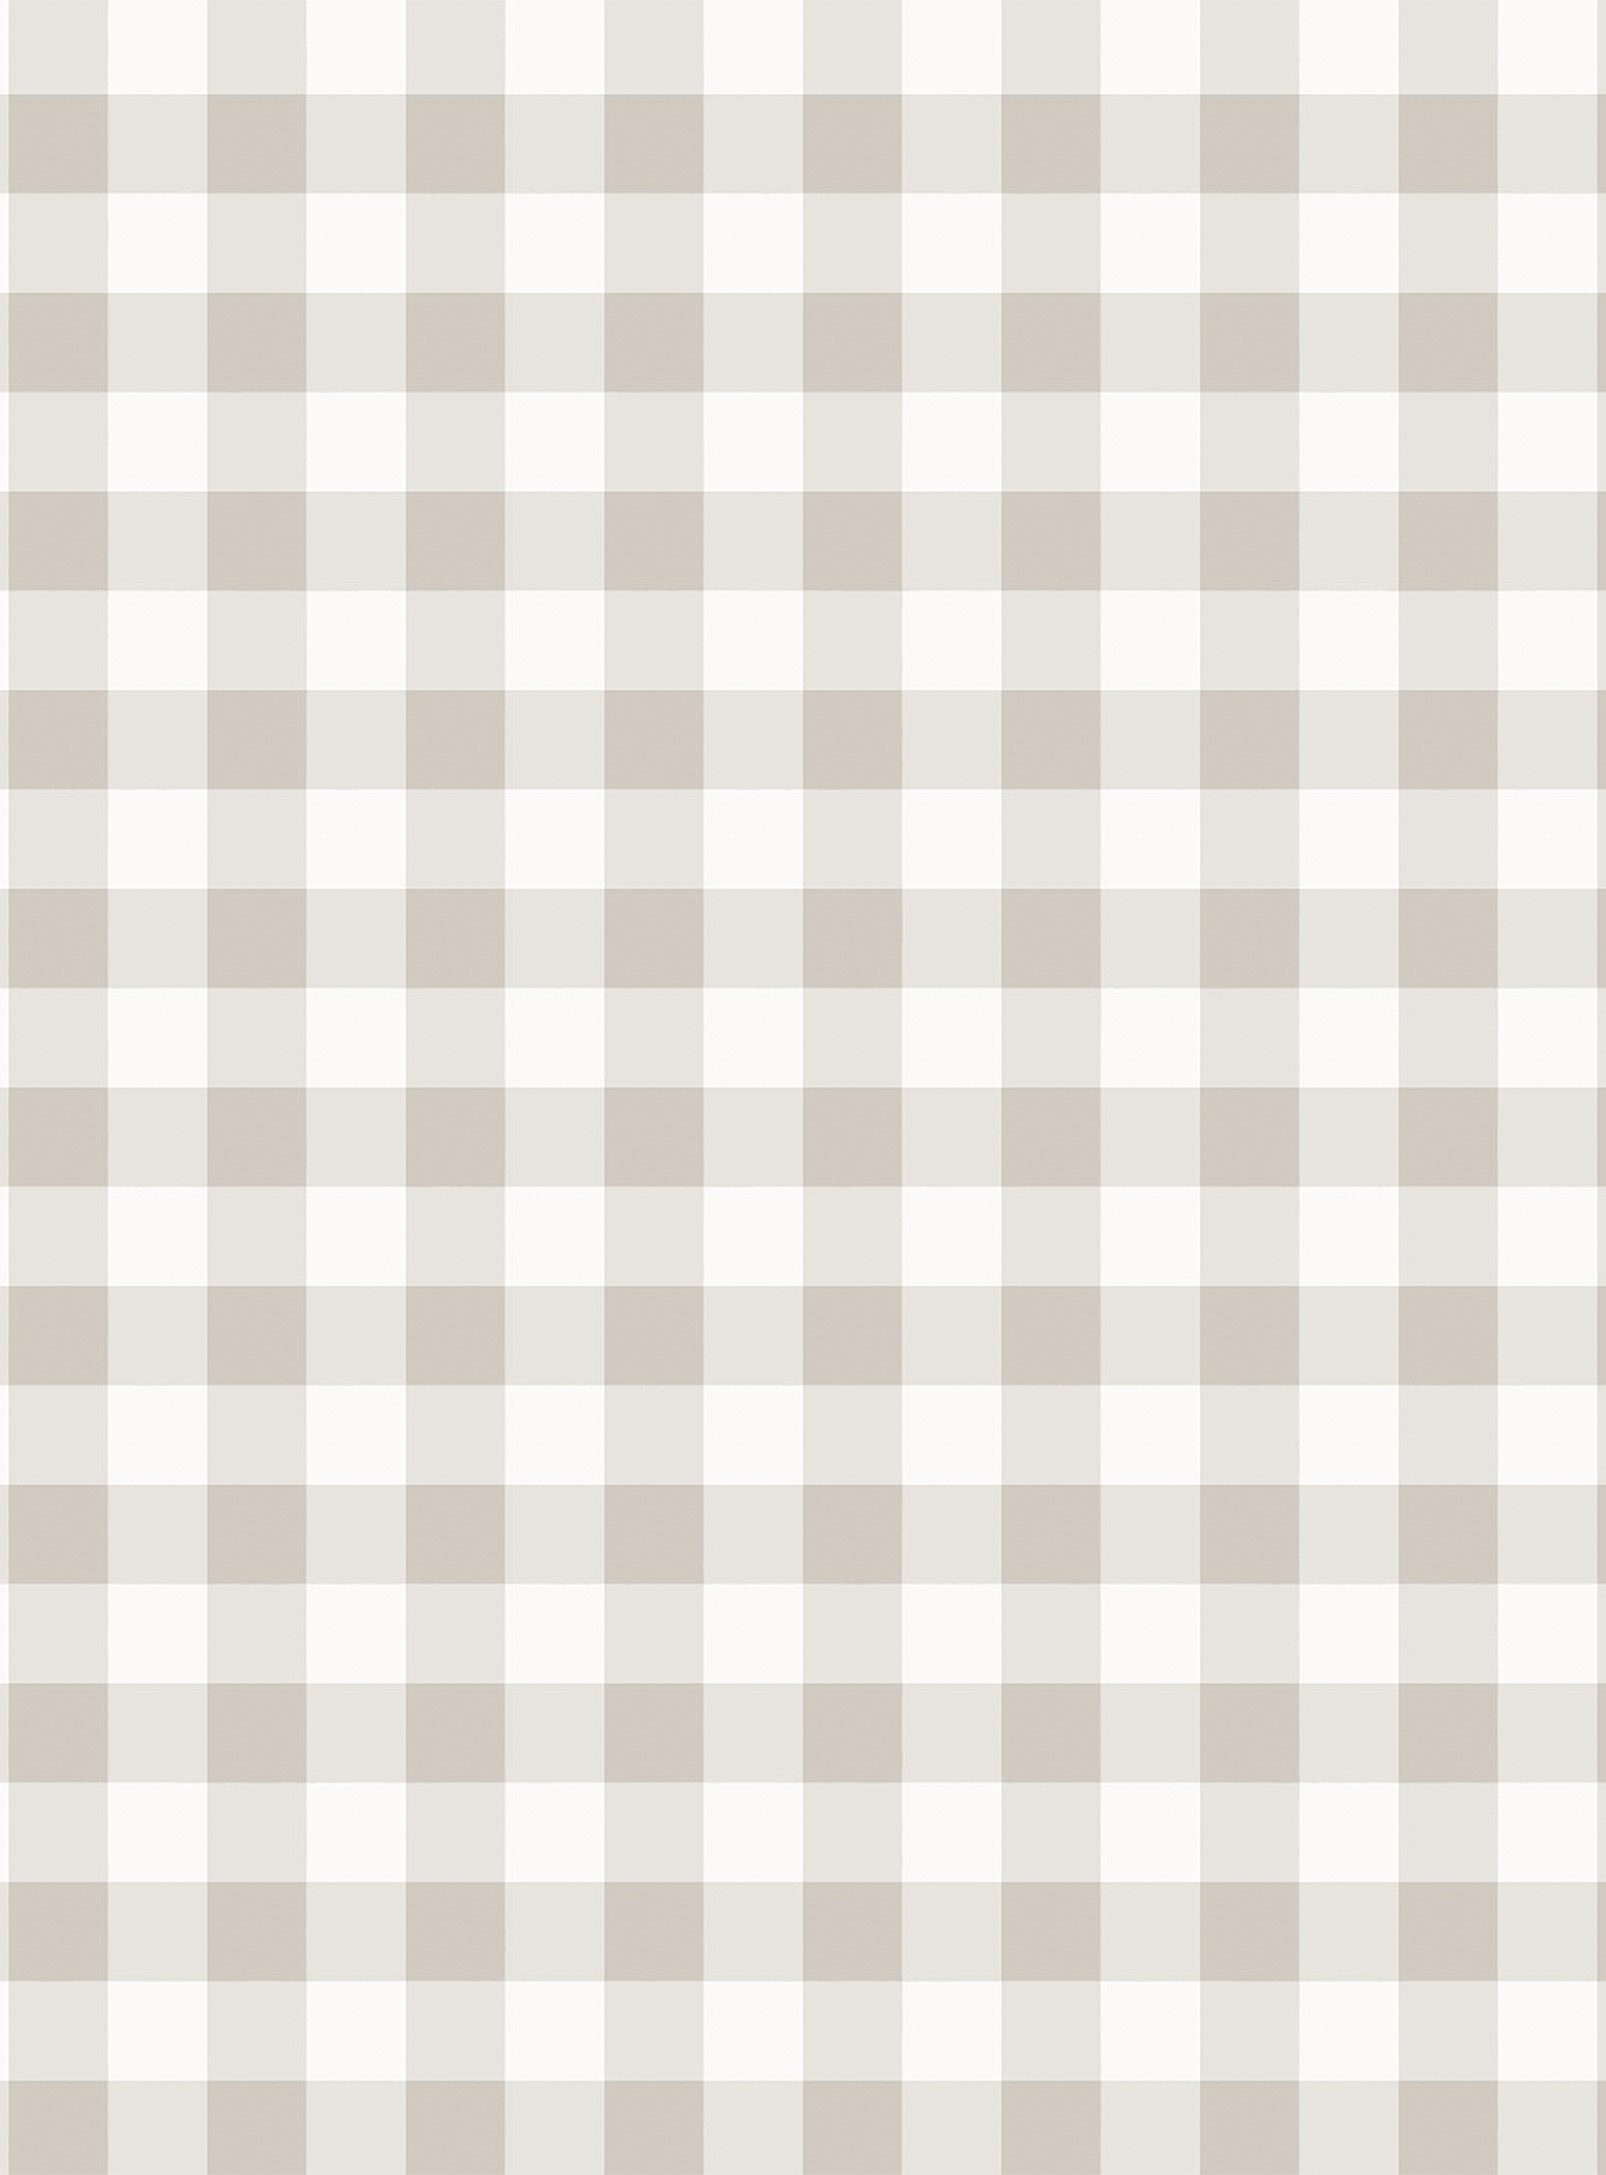 Station D Milan Checkered Wallpaper Strip See Available Sizes In Light Grey